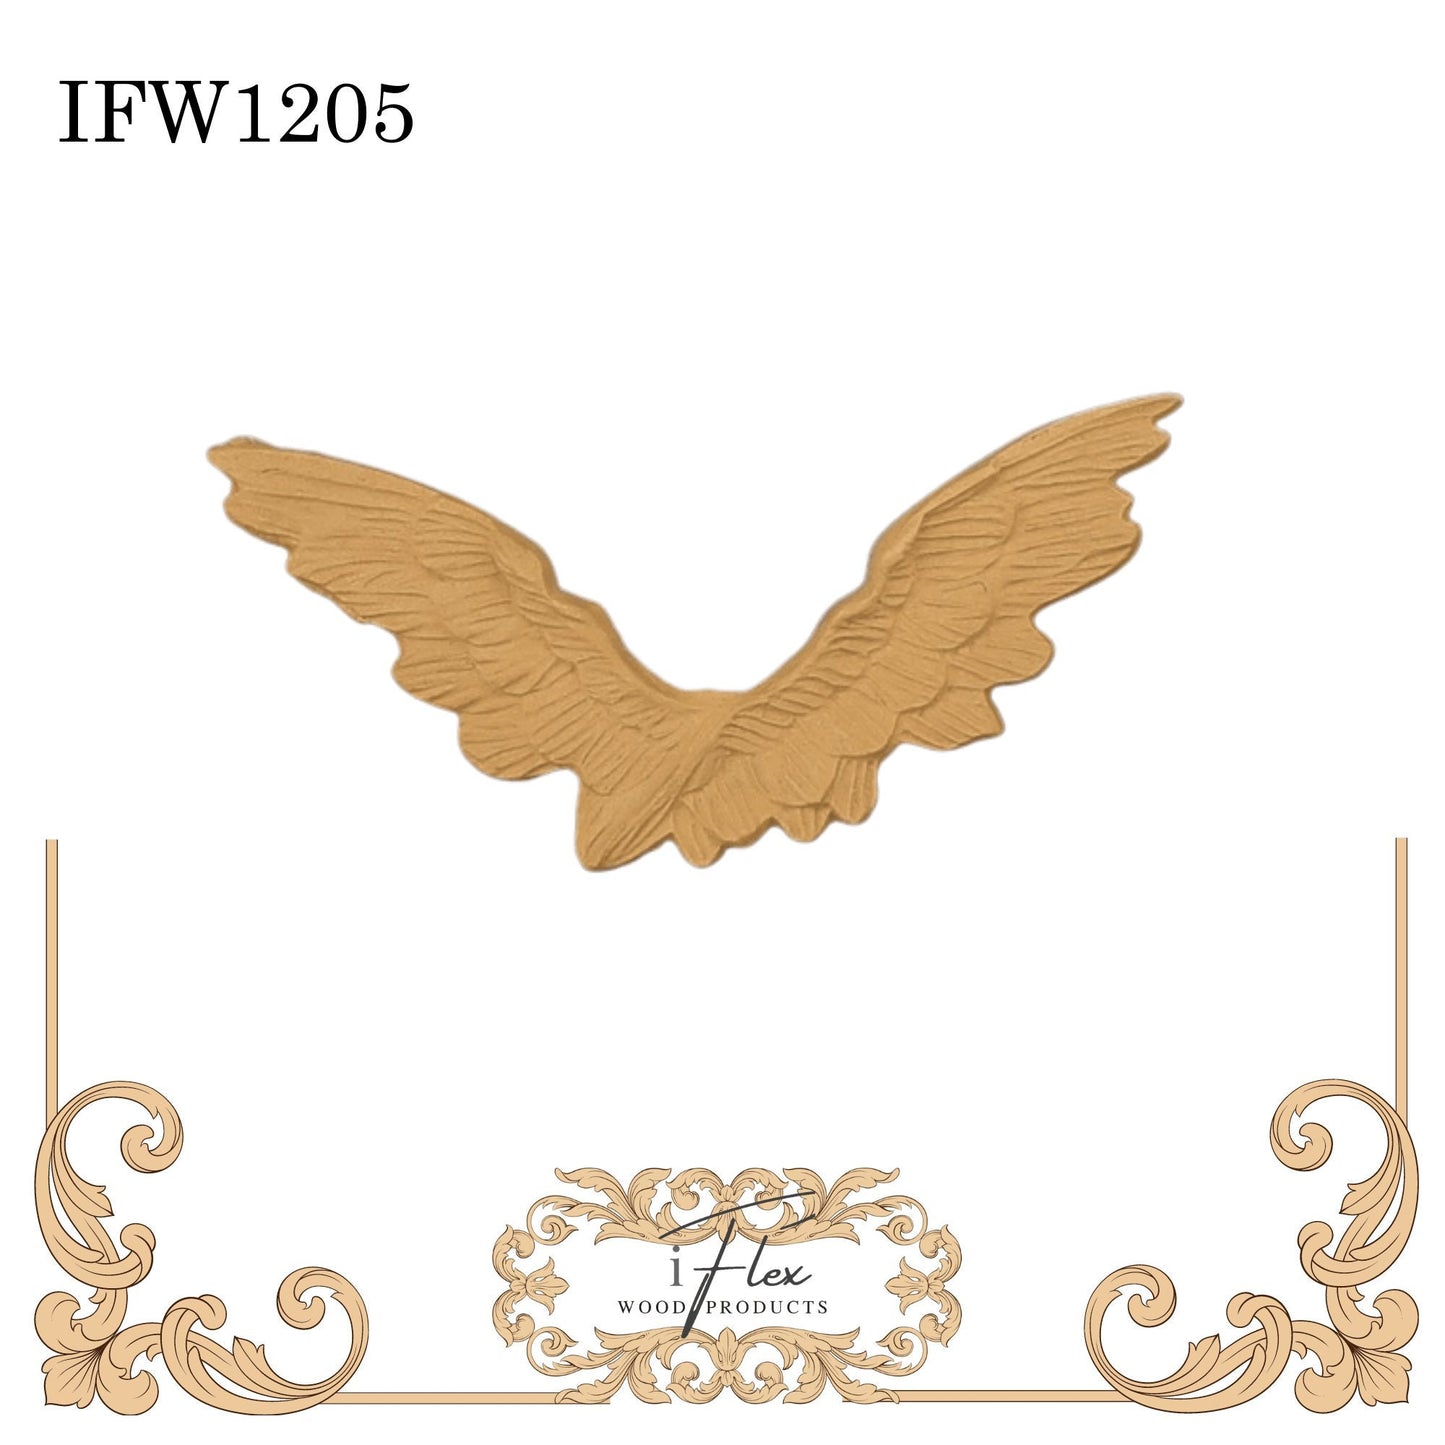 IFW 1205 iFlex Wood Products, bendable mouldings, flexible, wooden appliques, wings